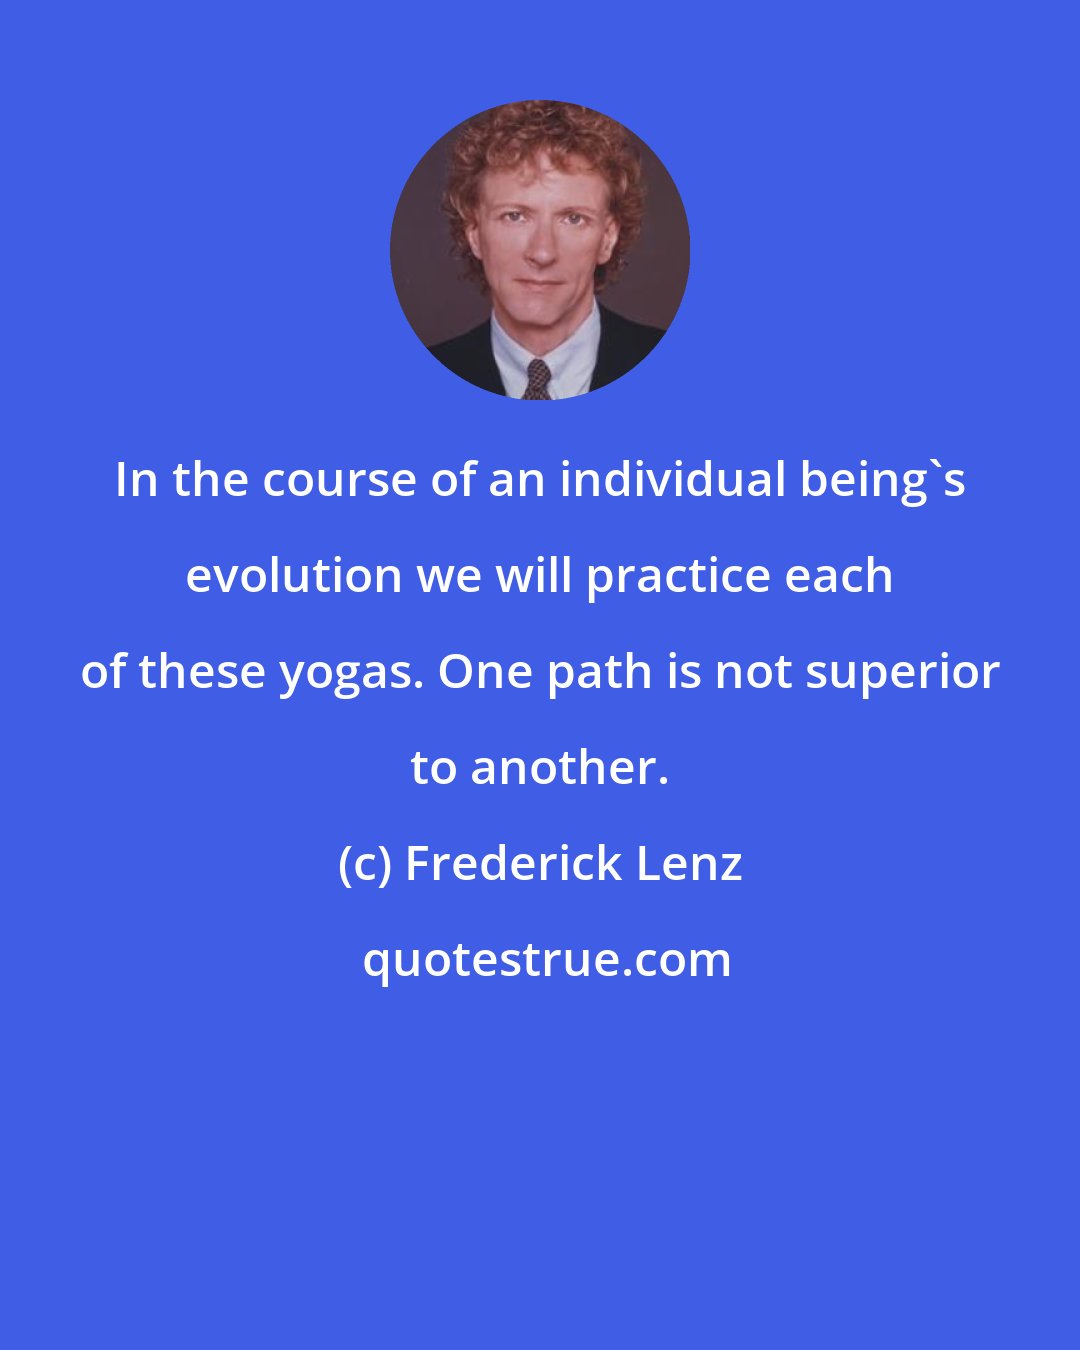 Frederick Lenz: In the course of an individual being's evolution we will practice each of these yogas. One path is not superior to another.